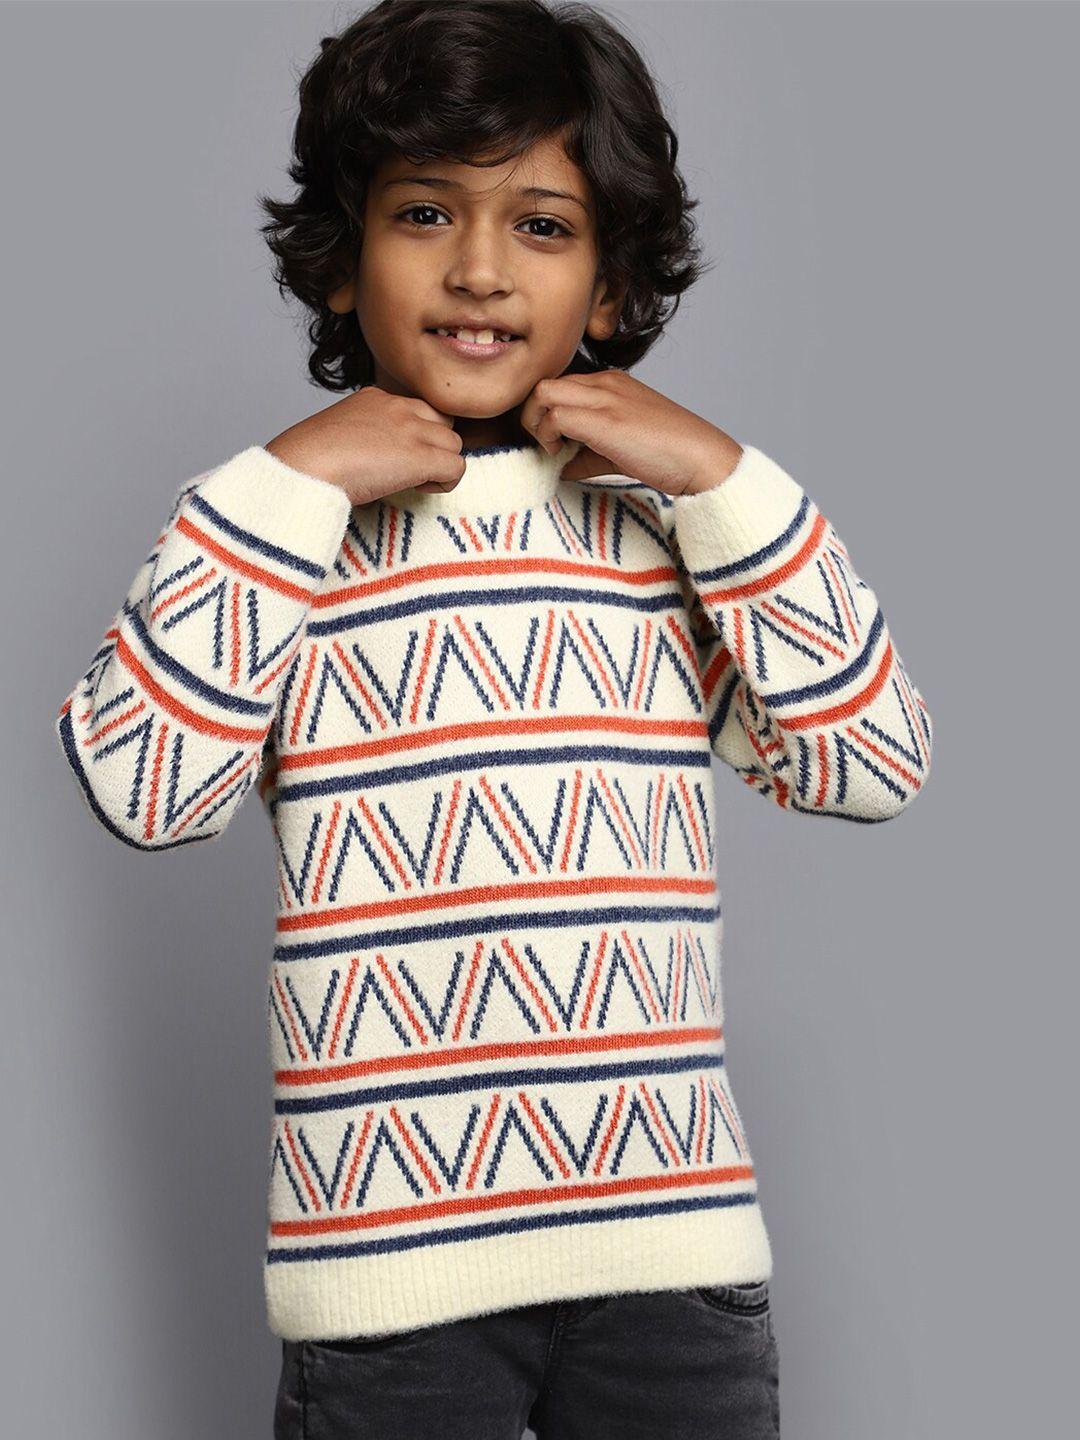 v-mart-boys-geometric-printed-long-sleeves-pullover-sweater